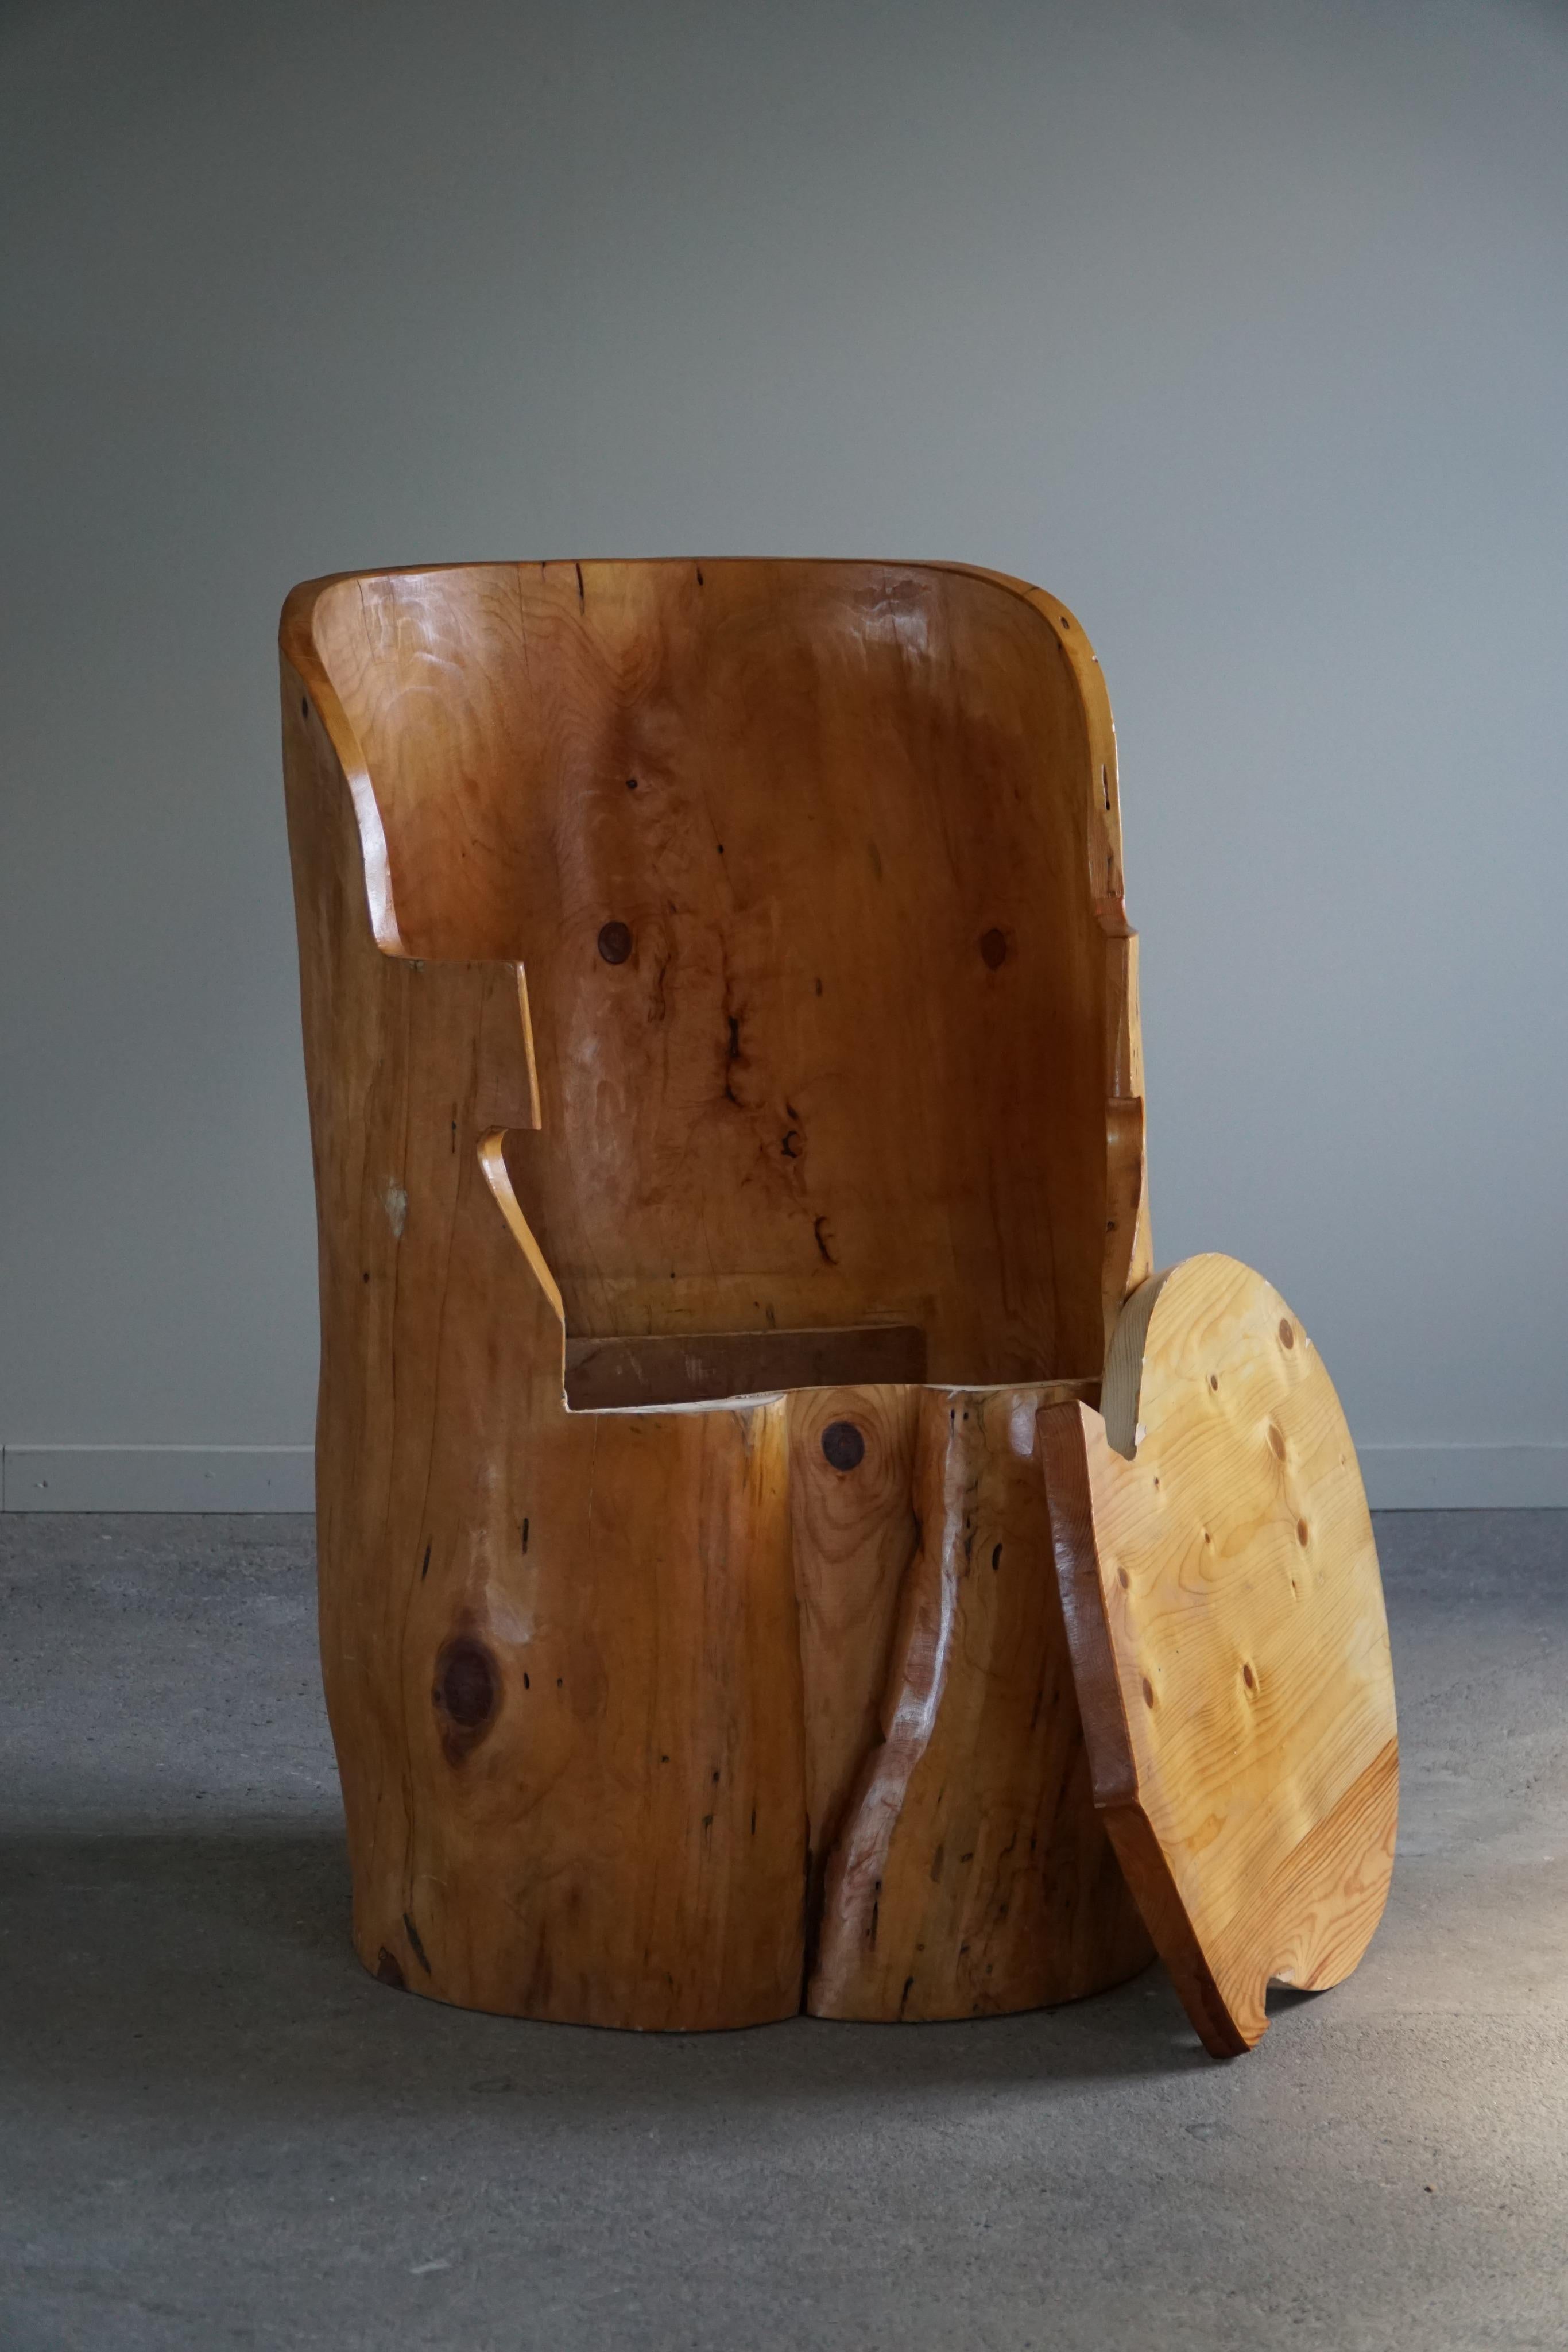 Stump Chair in Solid Birch by a Swedish Cabinetmaker, Wabi Sabi, 1950s For Sale 9